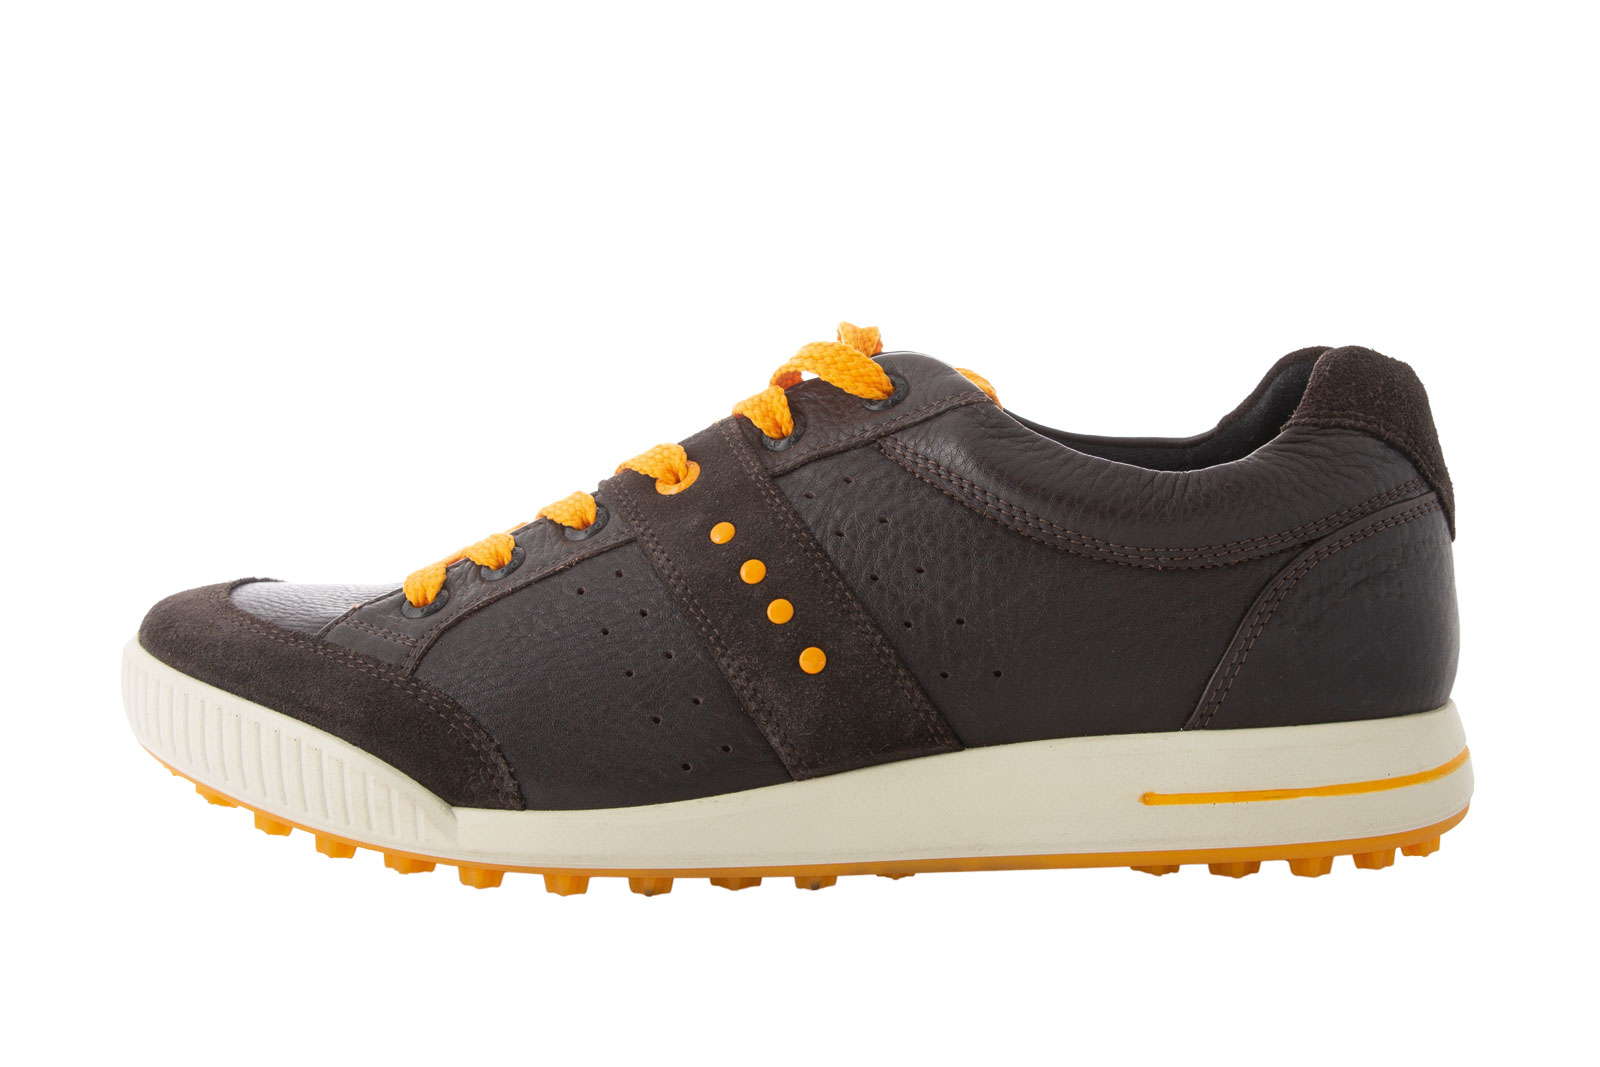 2010: ECCO GOLF STREET - the iconic golf shoe started there hybrid revolution